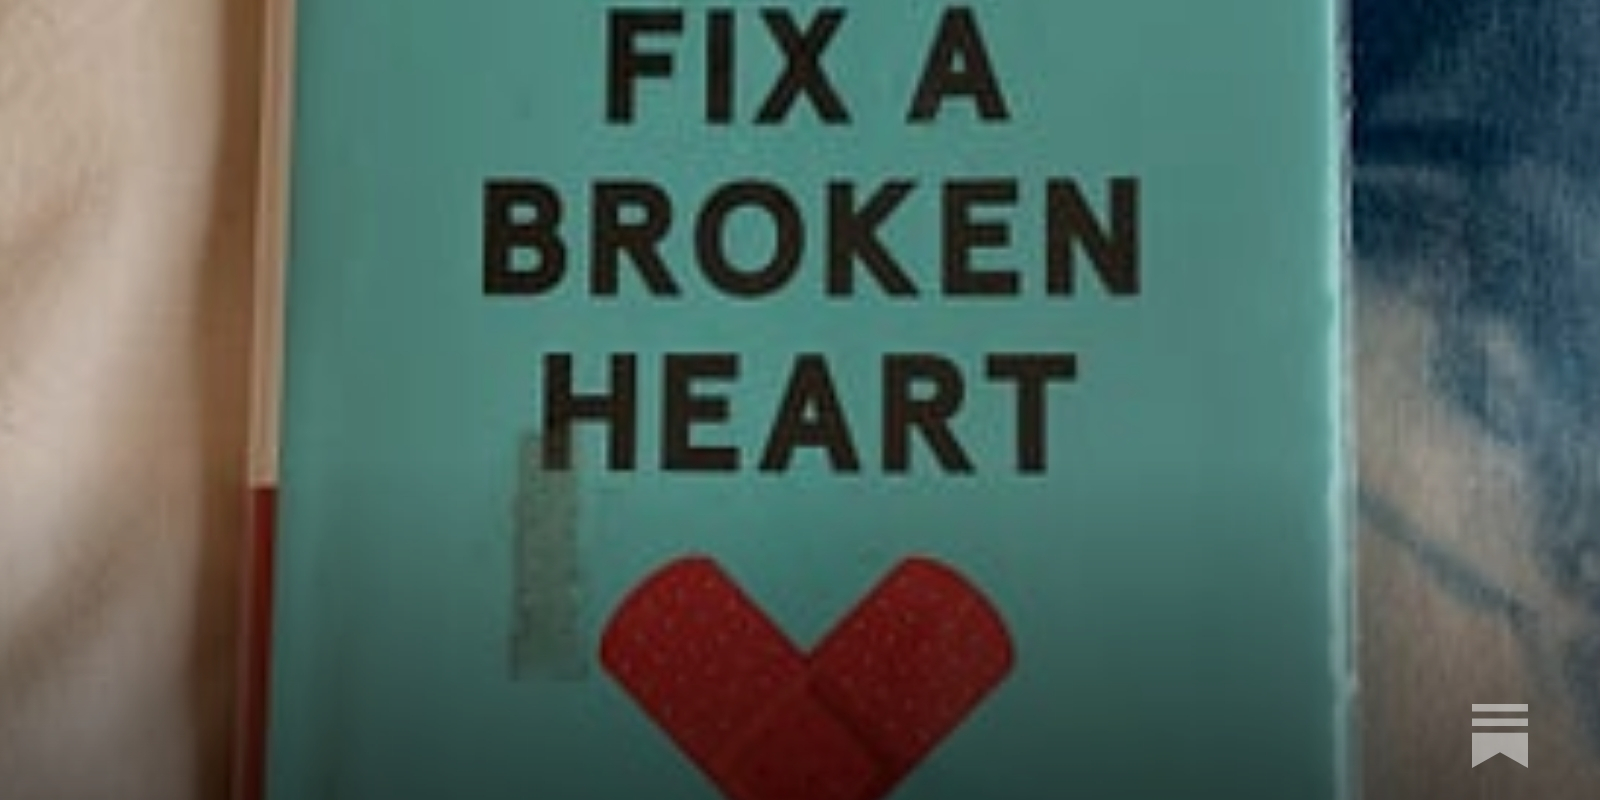 How To Fix A Broken Heart: The Must-Read Guide that Will Change